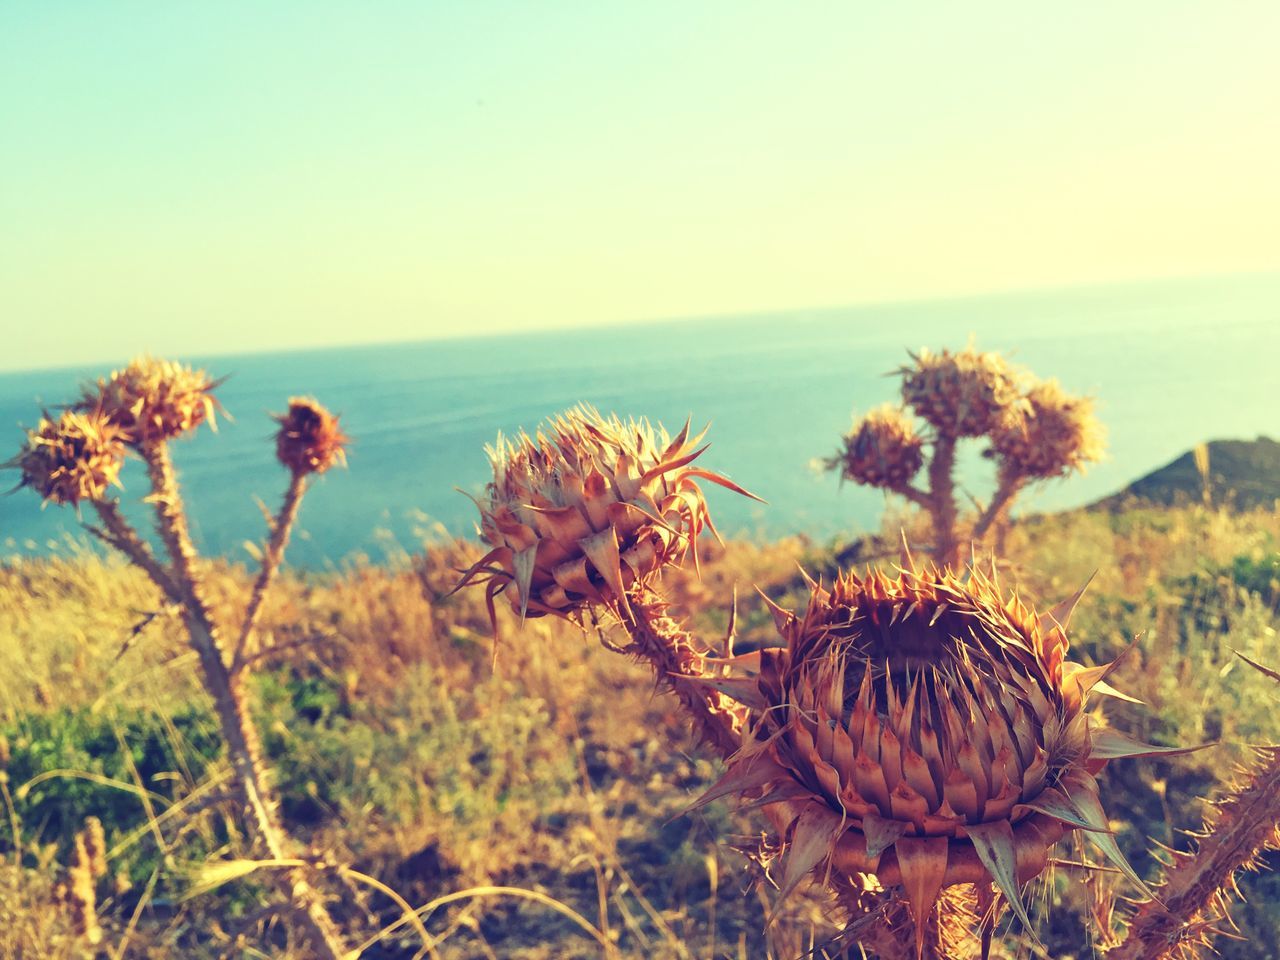 horizon over water, sea, growth, plant, beauty in nature, nature, scenics, flower, spiked, tranquil scene, tranquility, idyllic, thorn, water, thistle, focus on foreground, fragility, wildflower, day, outdoors, sky, non-urban scene, remote, uncultivated, seascape, no people, shore